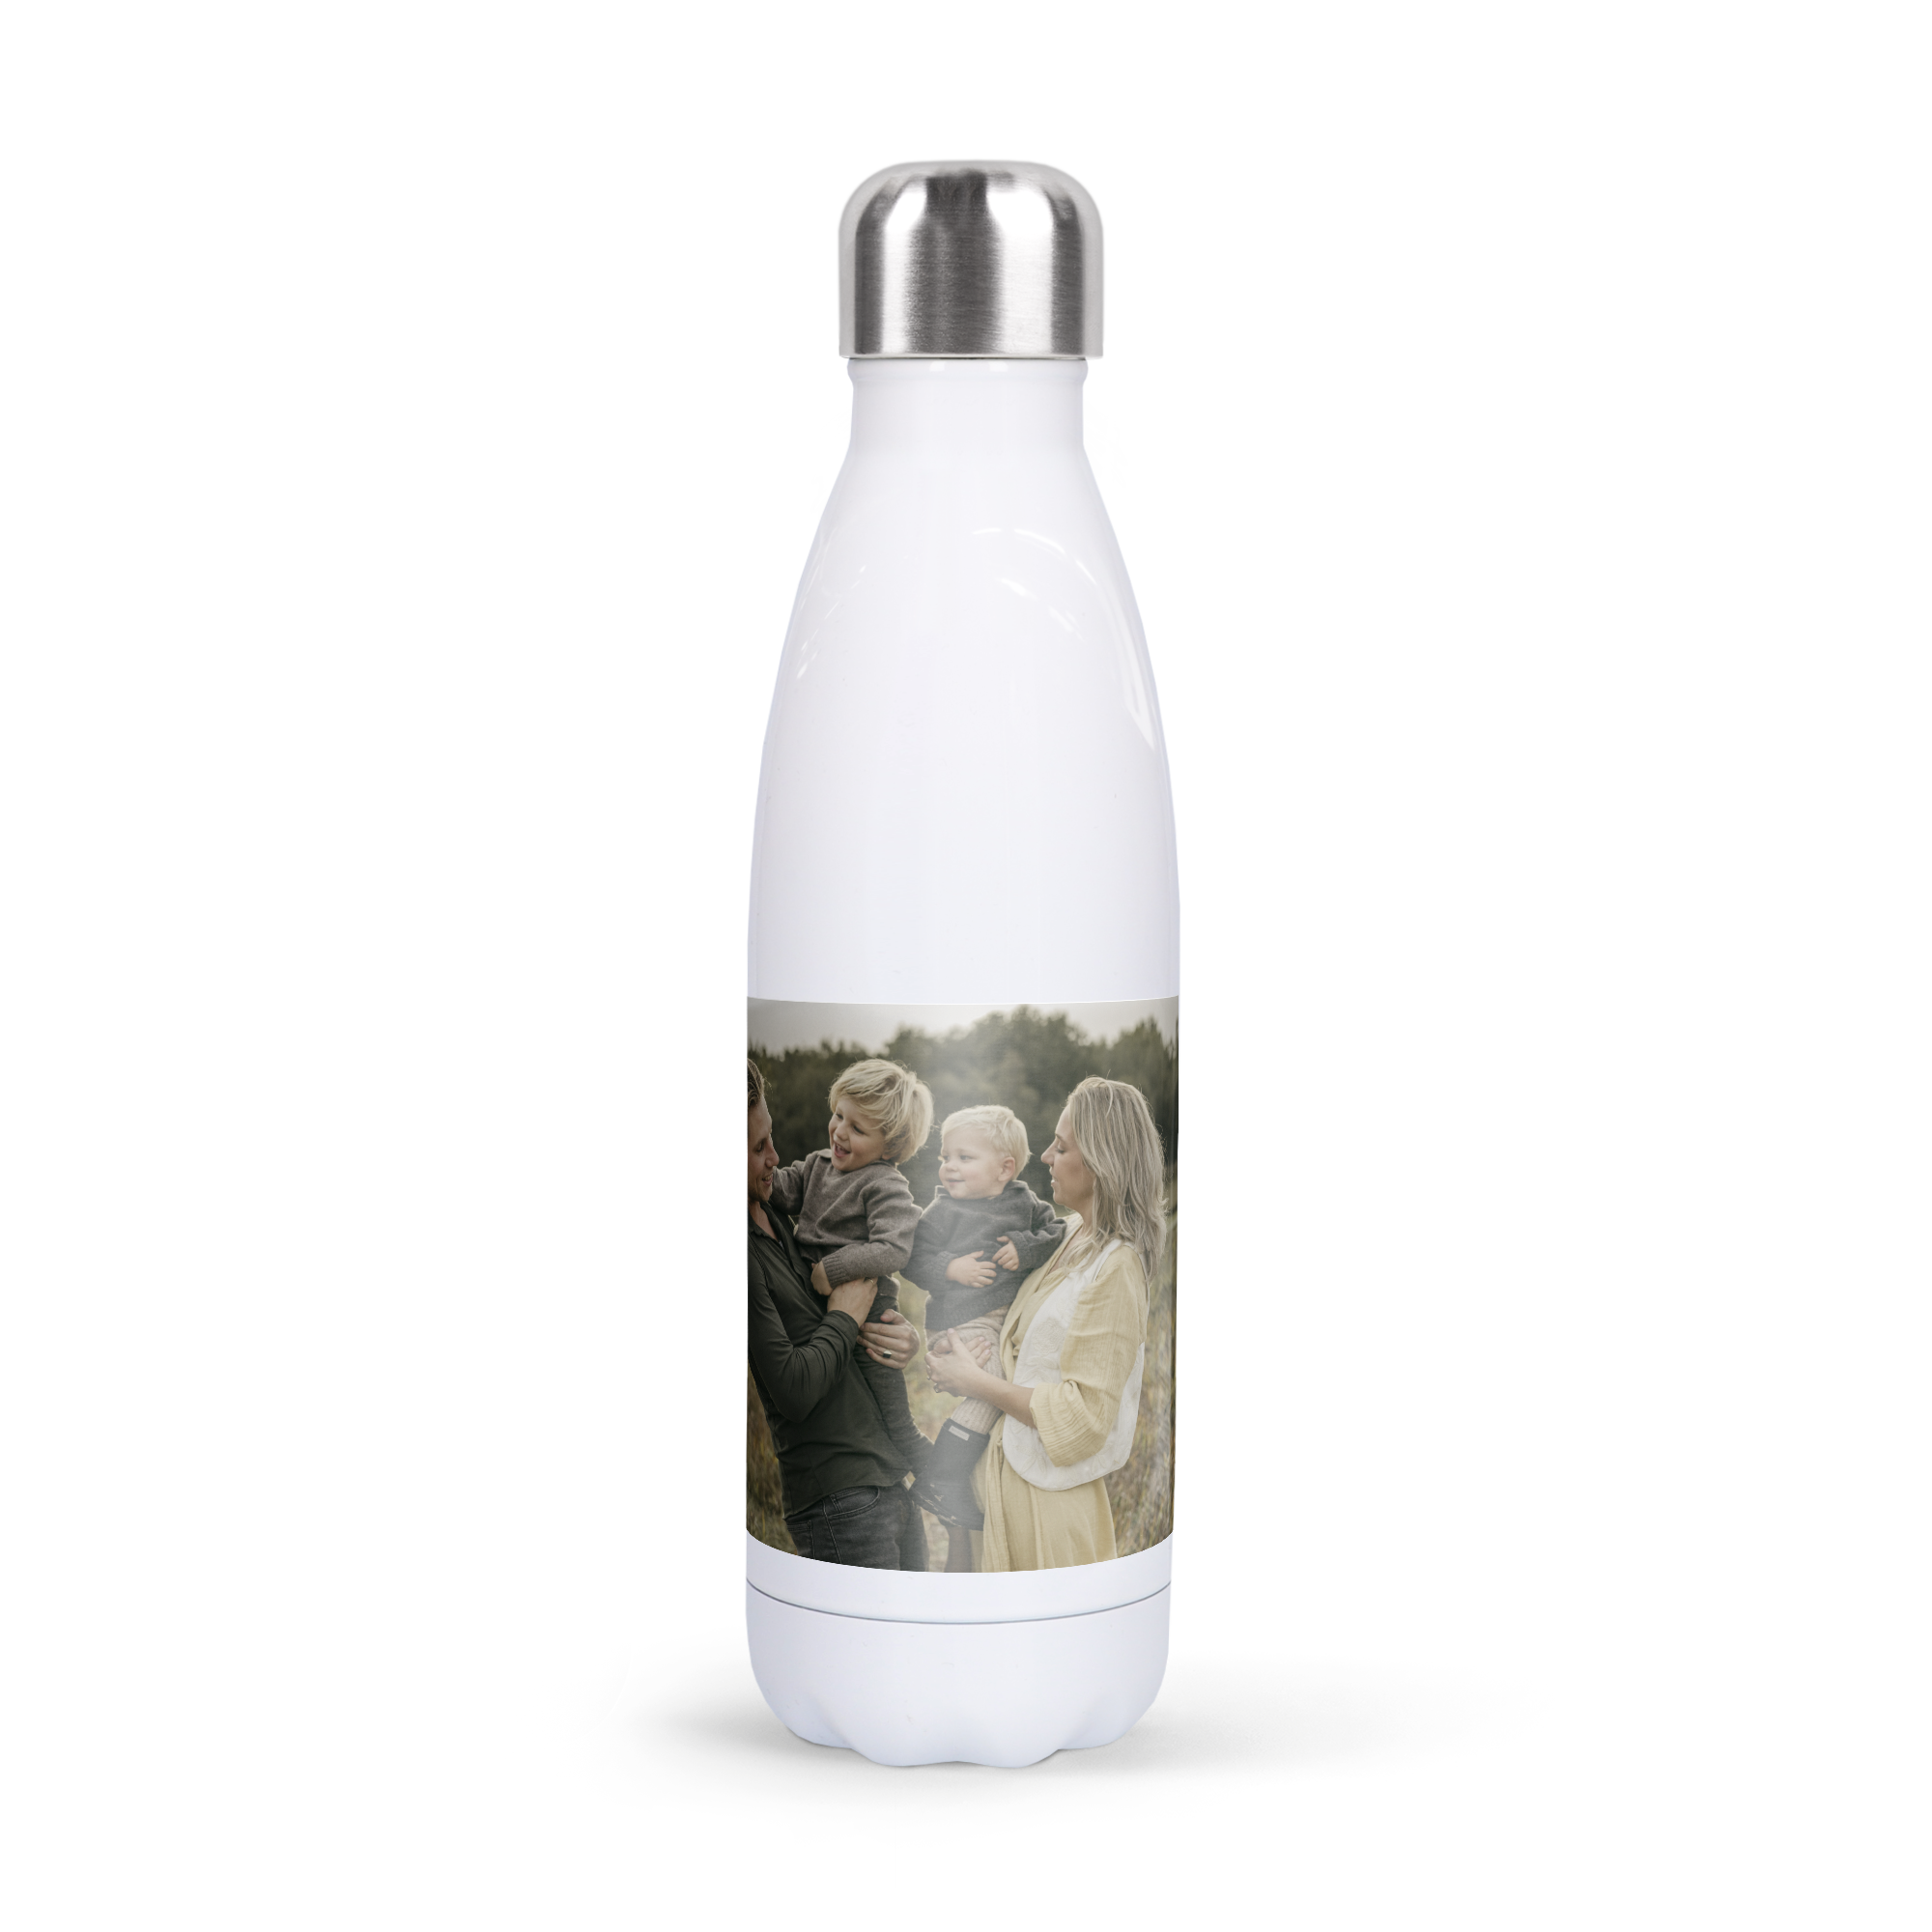 Personalised insulated water bottle - White